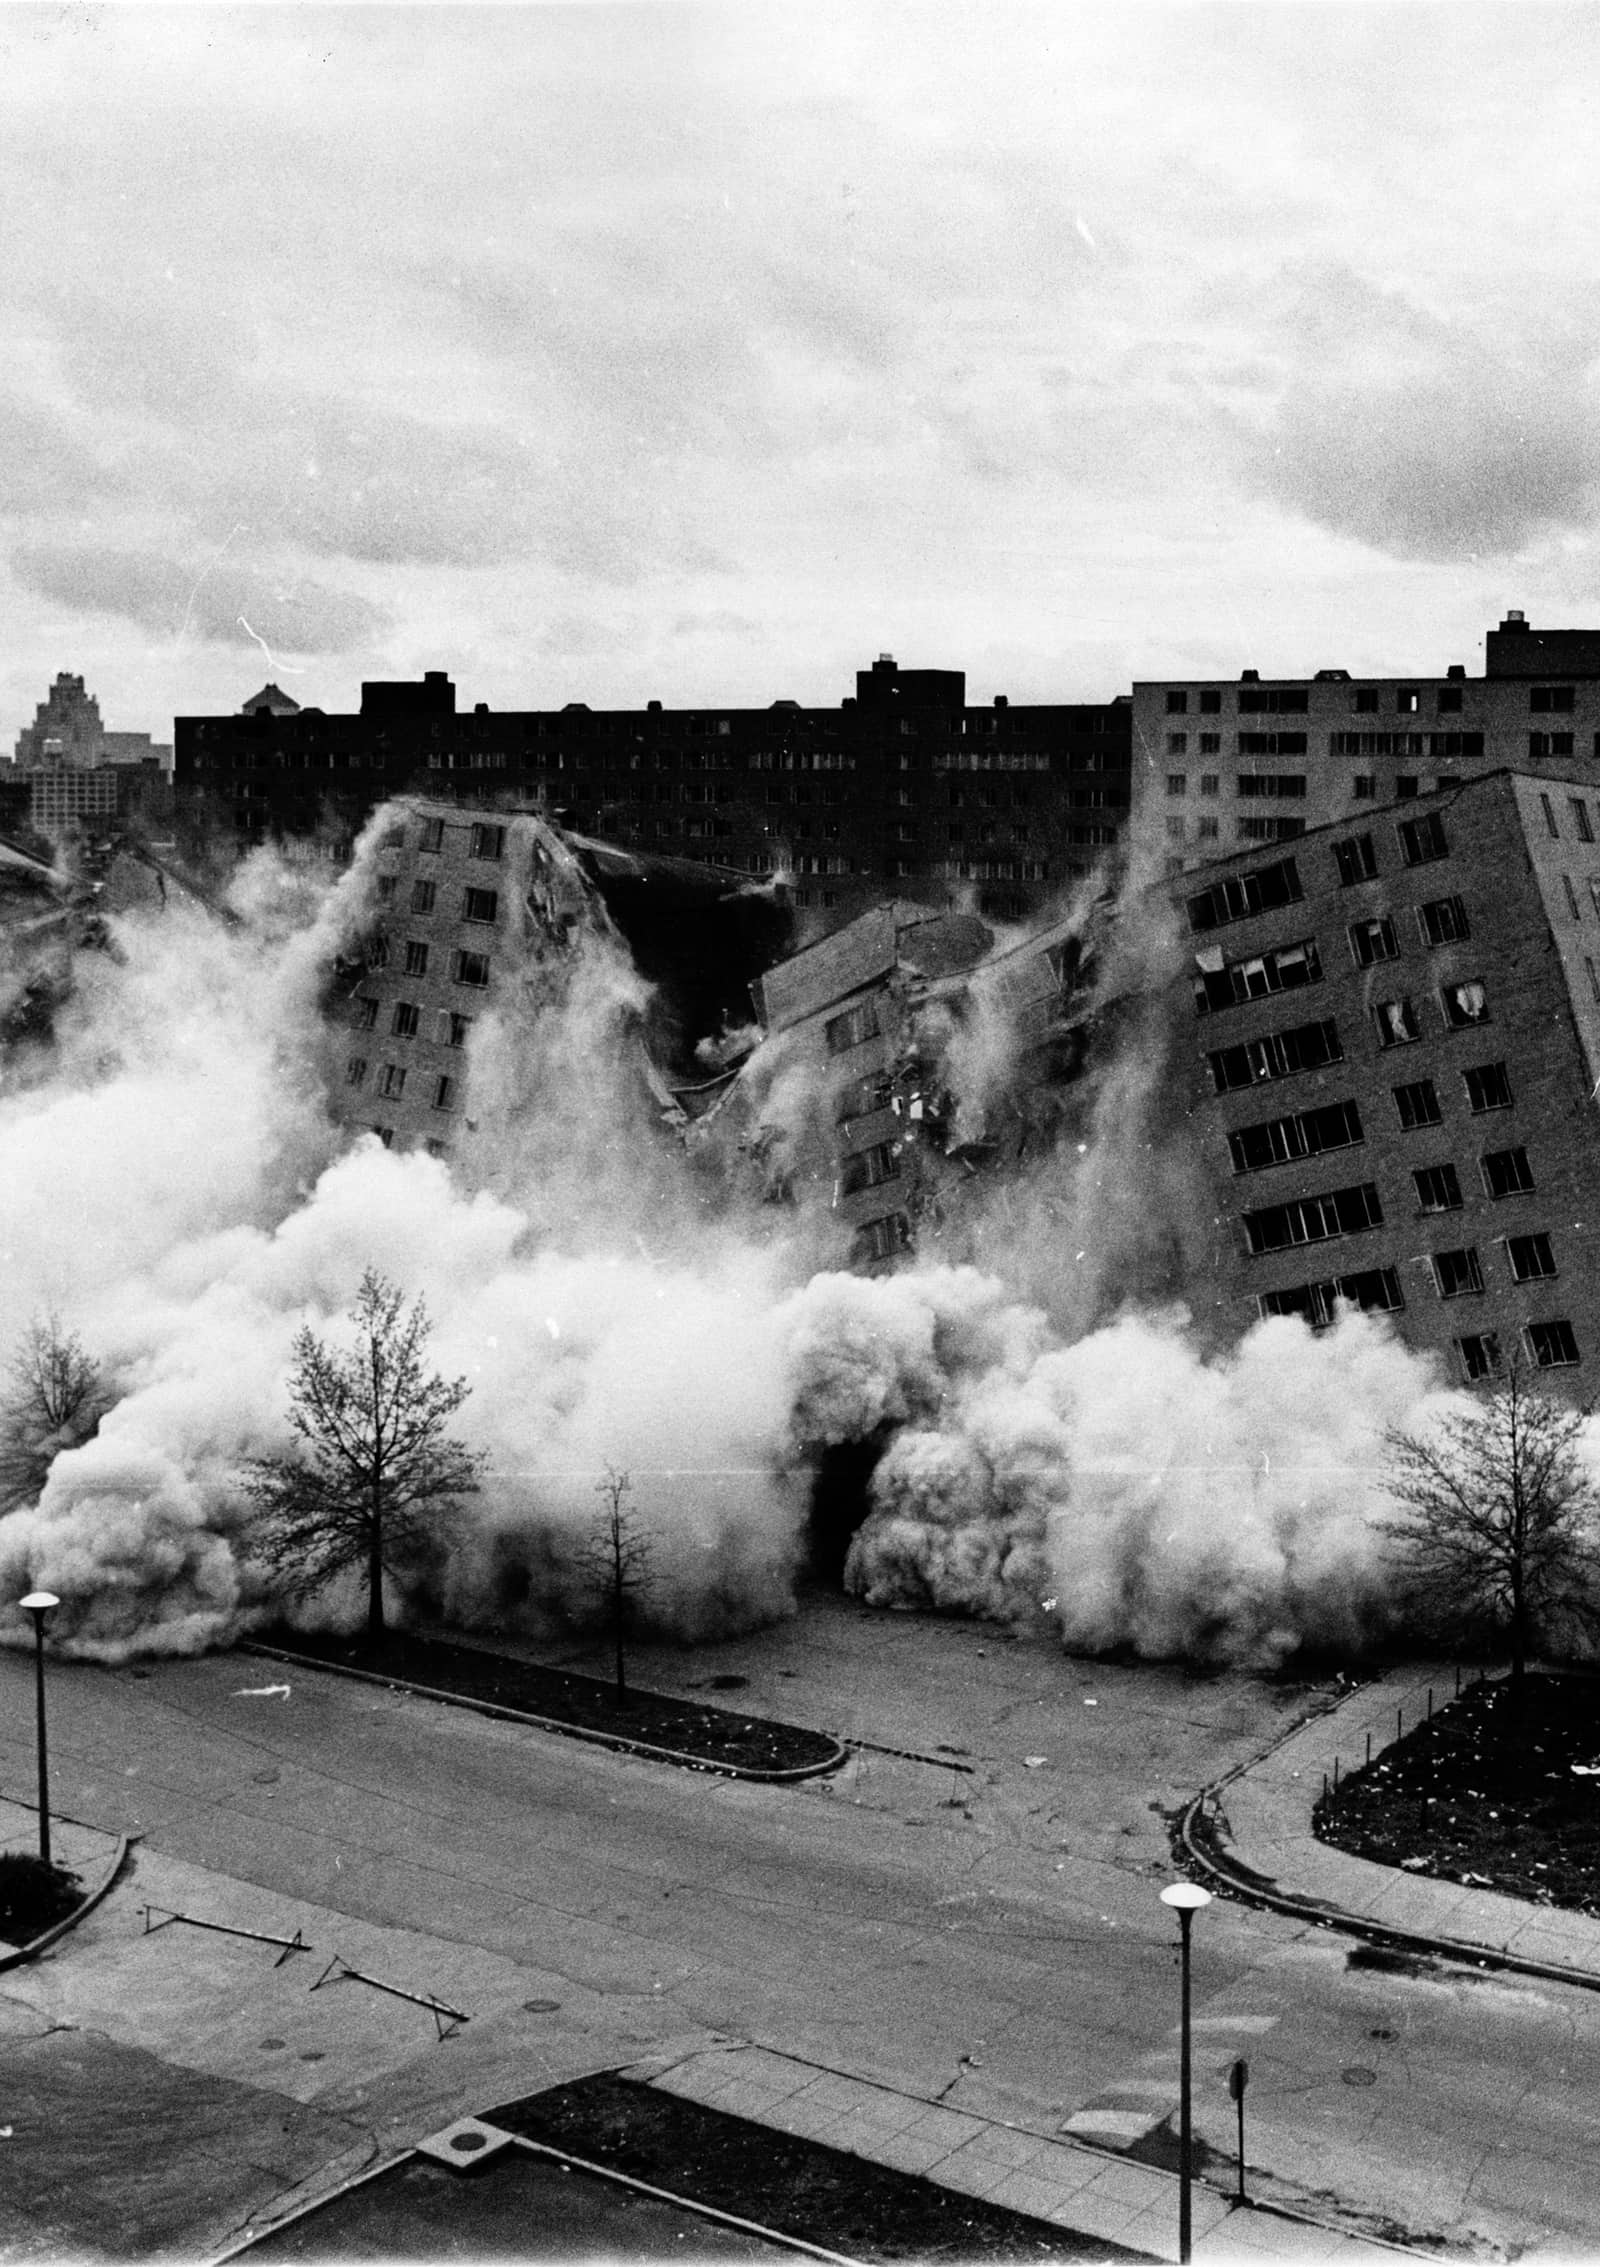 Minoru Yamasaki, Pruitt-Igoe Homes, St. Louis, MO, United States, 1956. Because of deteriorated condition the 33 buildings were demolished between 1972 and 1976. © US Department of Housing and Urban Development, Office of Policy Development and Research, c. 1972.